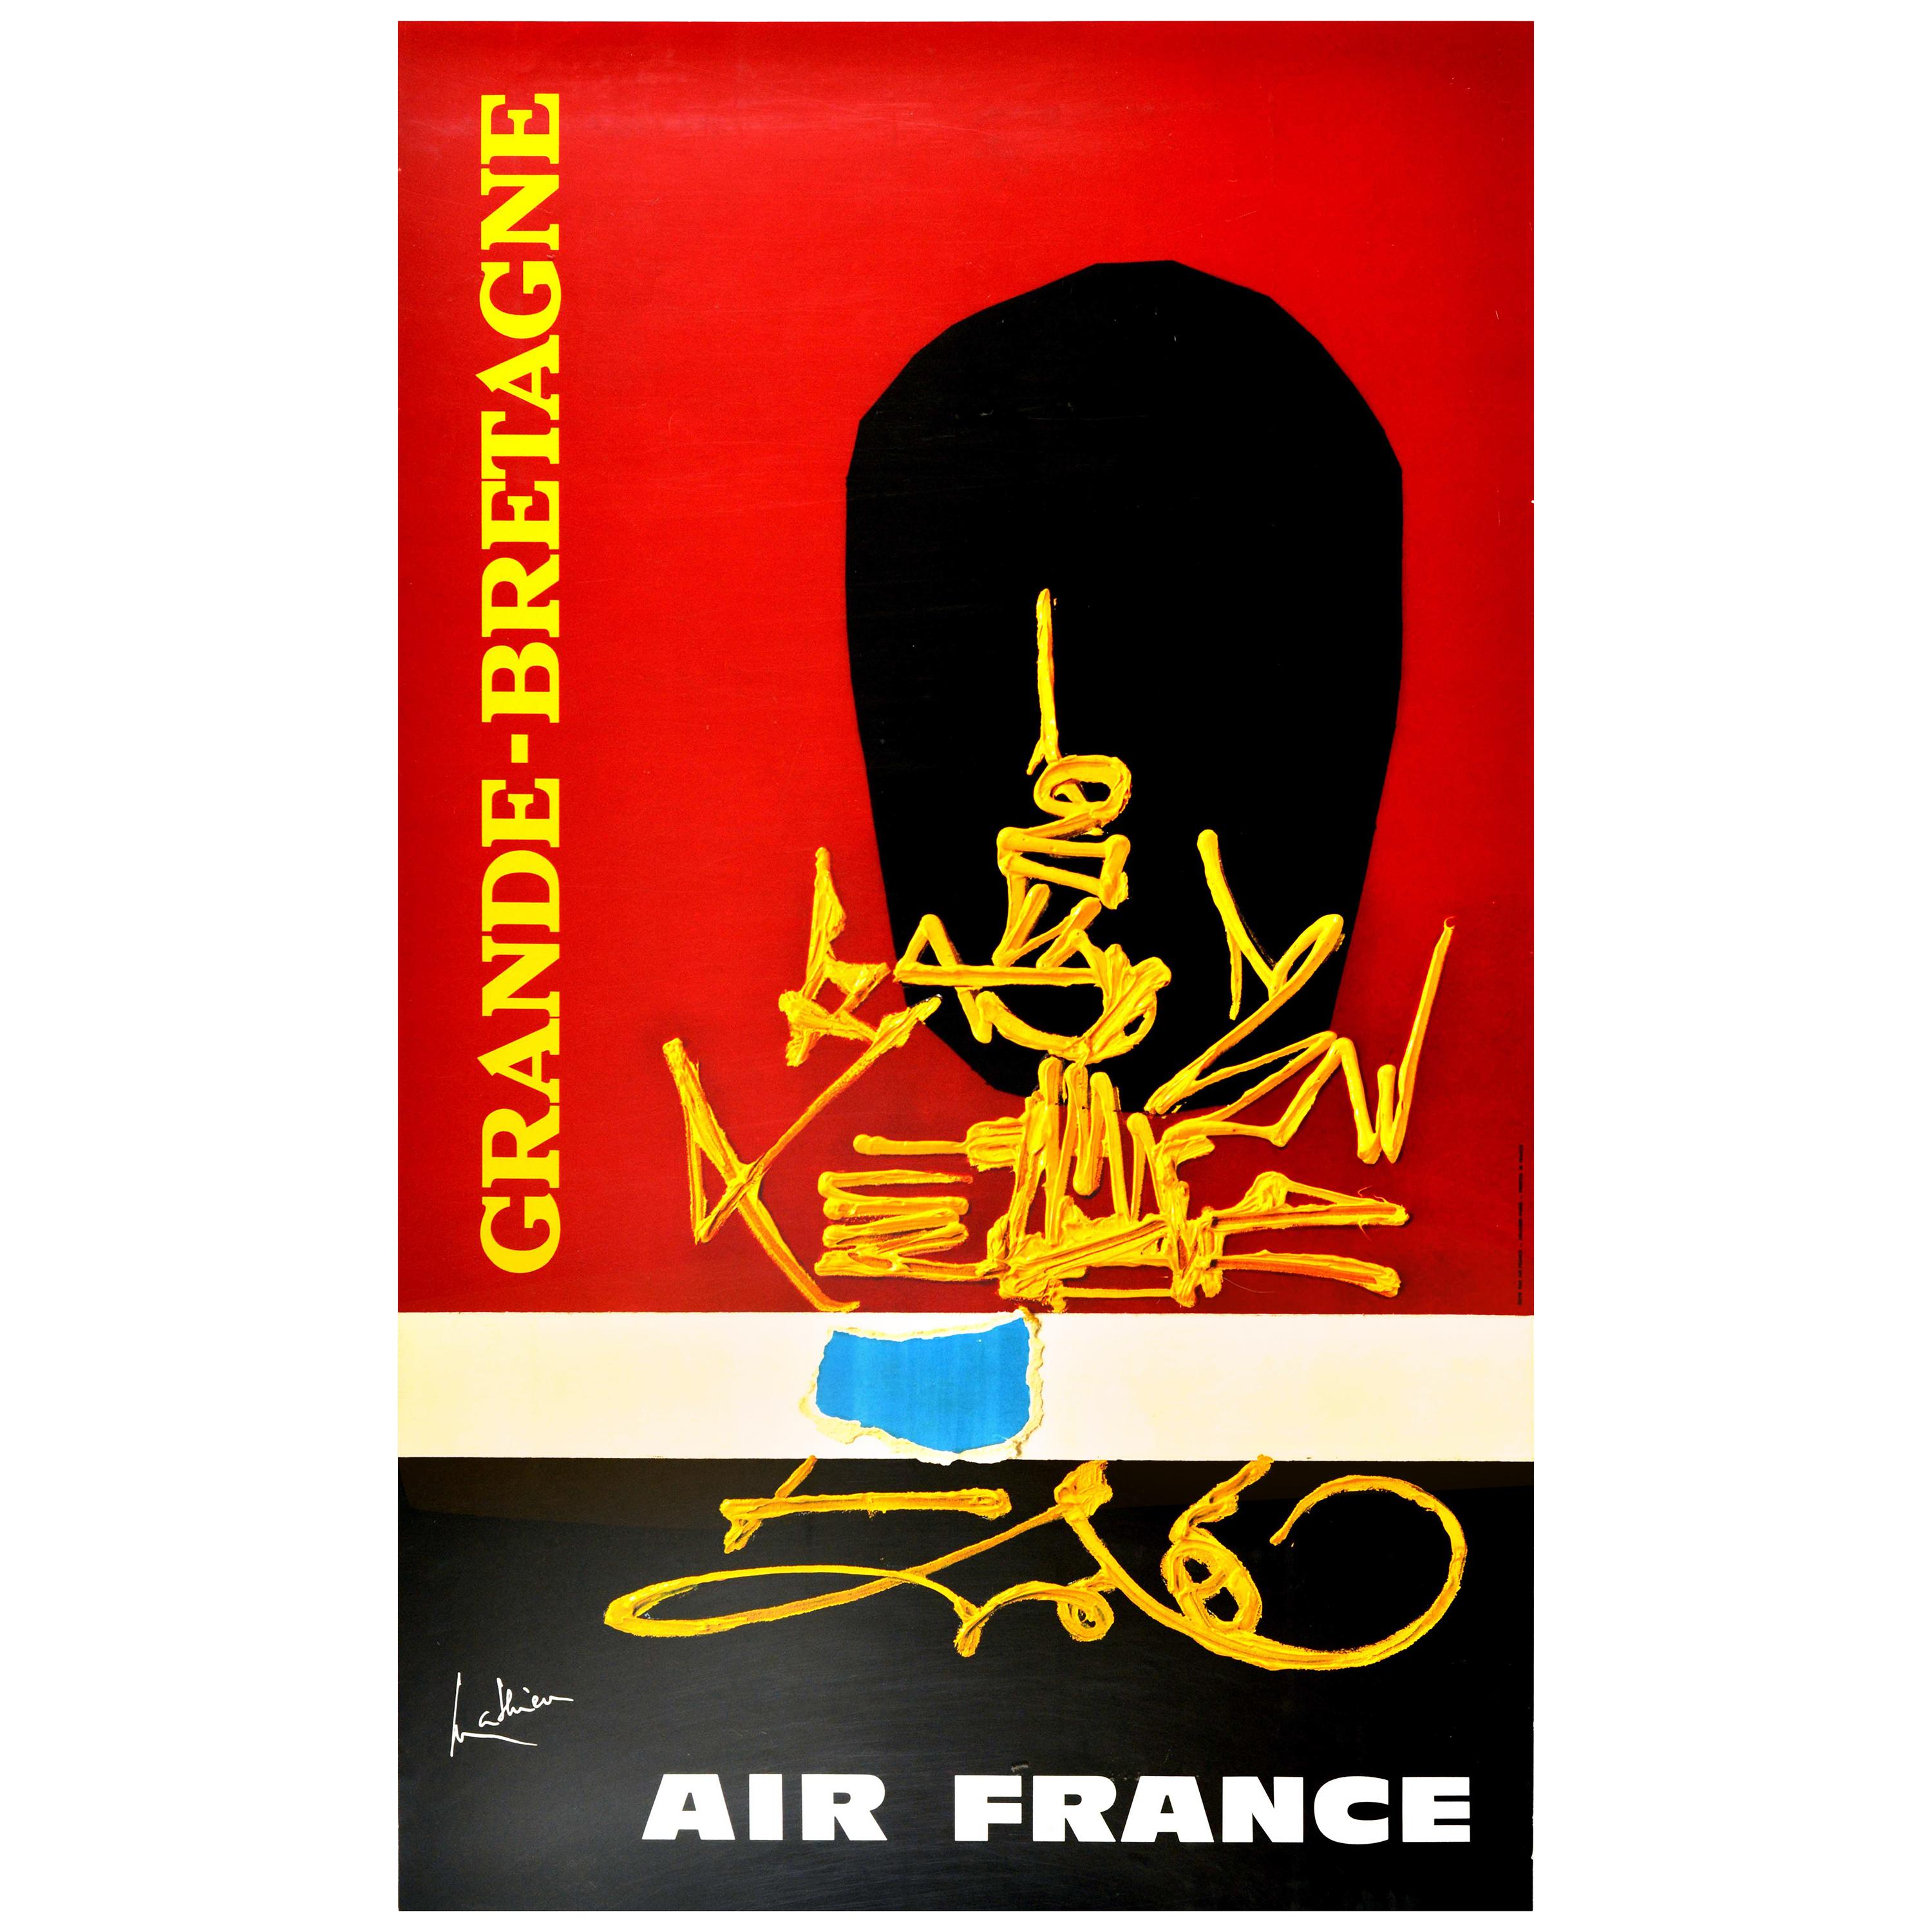 Original vintage travel advertising poster, Air France Great Britain / Grande Bretagne, from a series commissioned by Air France in 1968 featuring artwork by one of the leading French abstract expressionist artists Georges Mathieu (1921-2012).